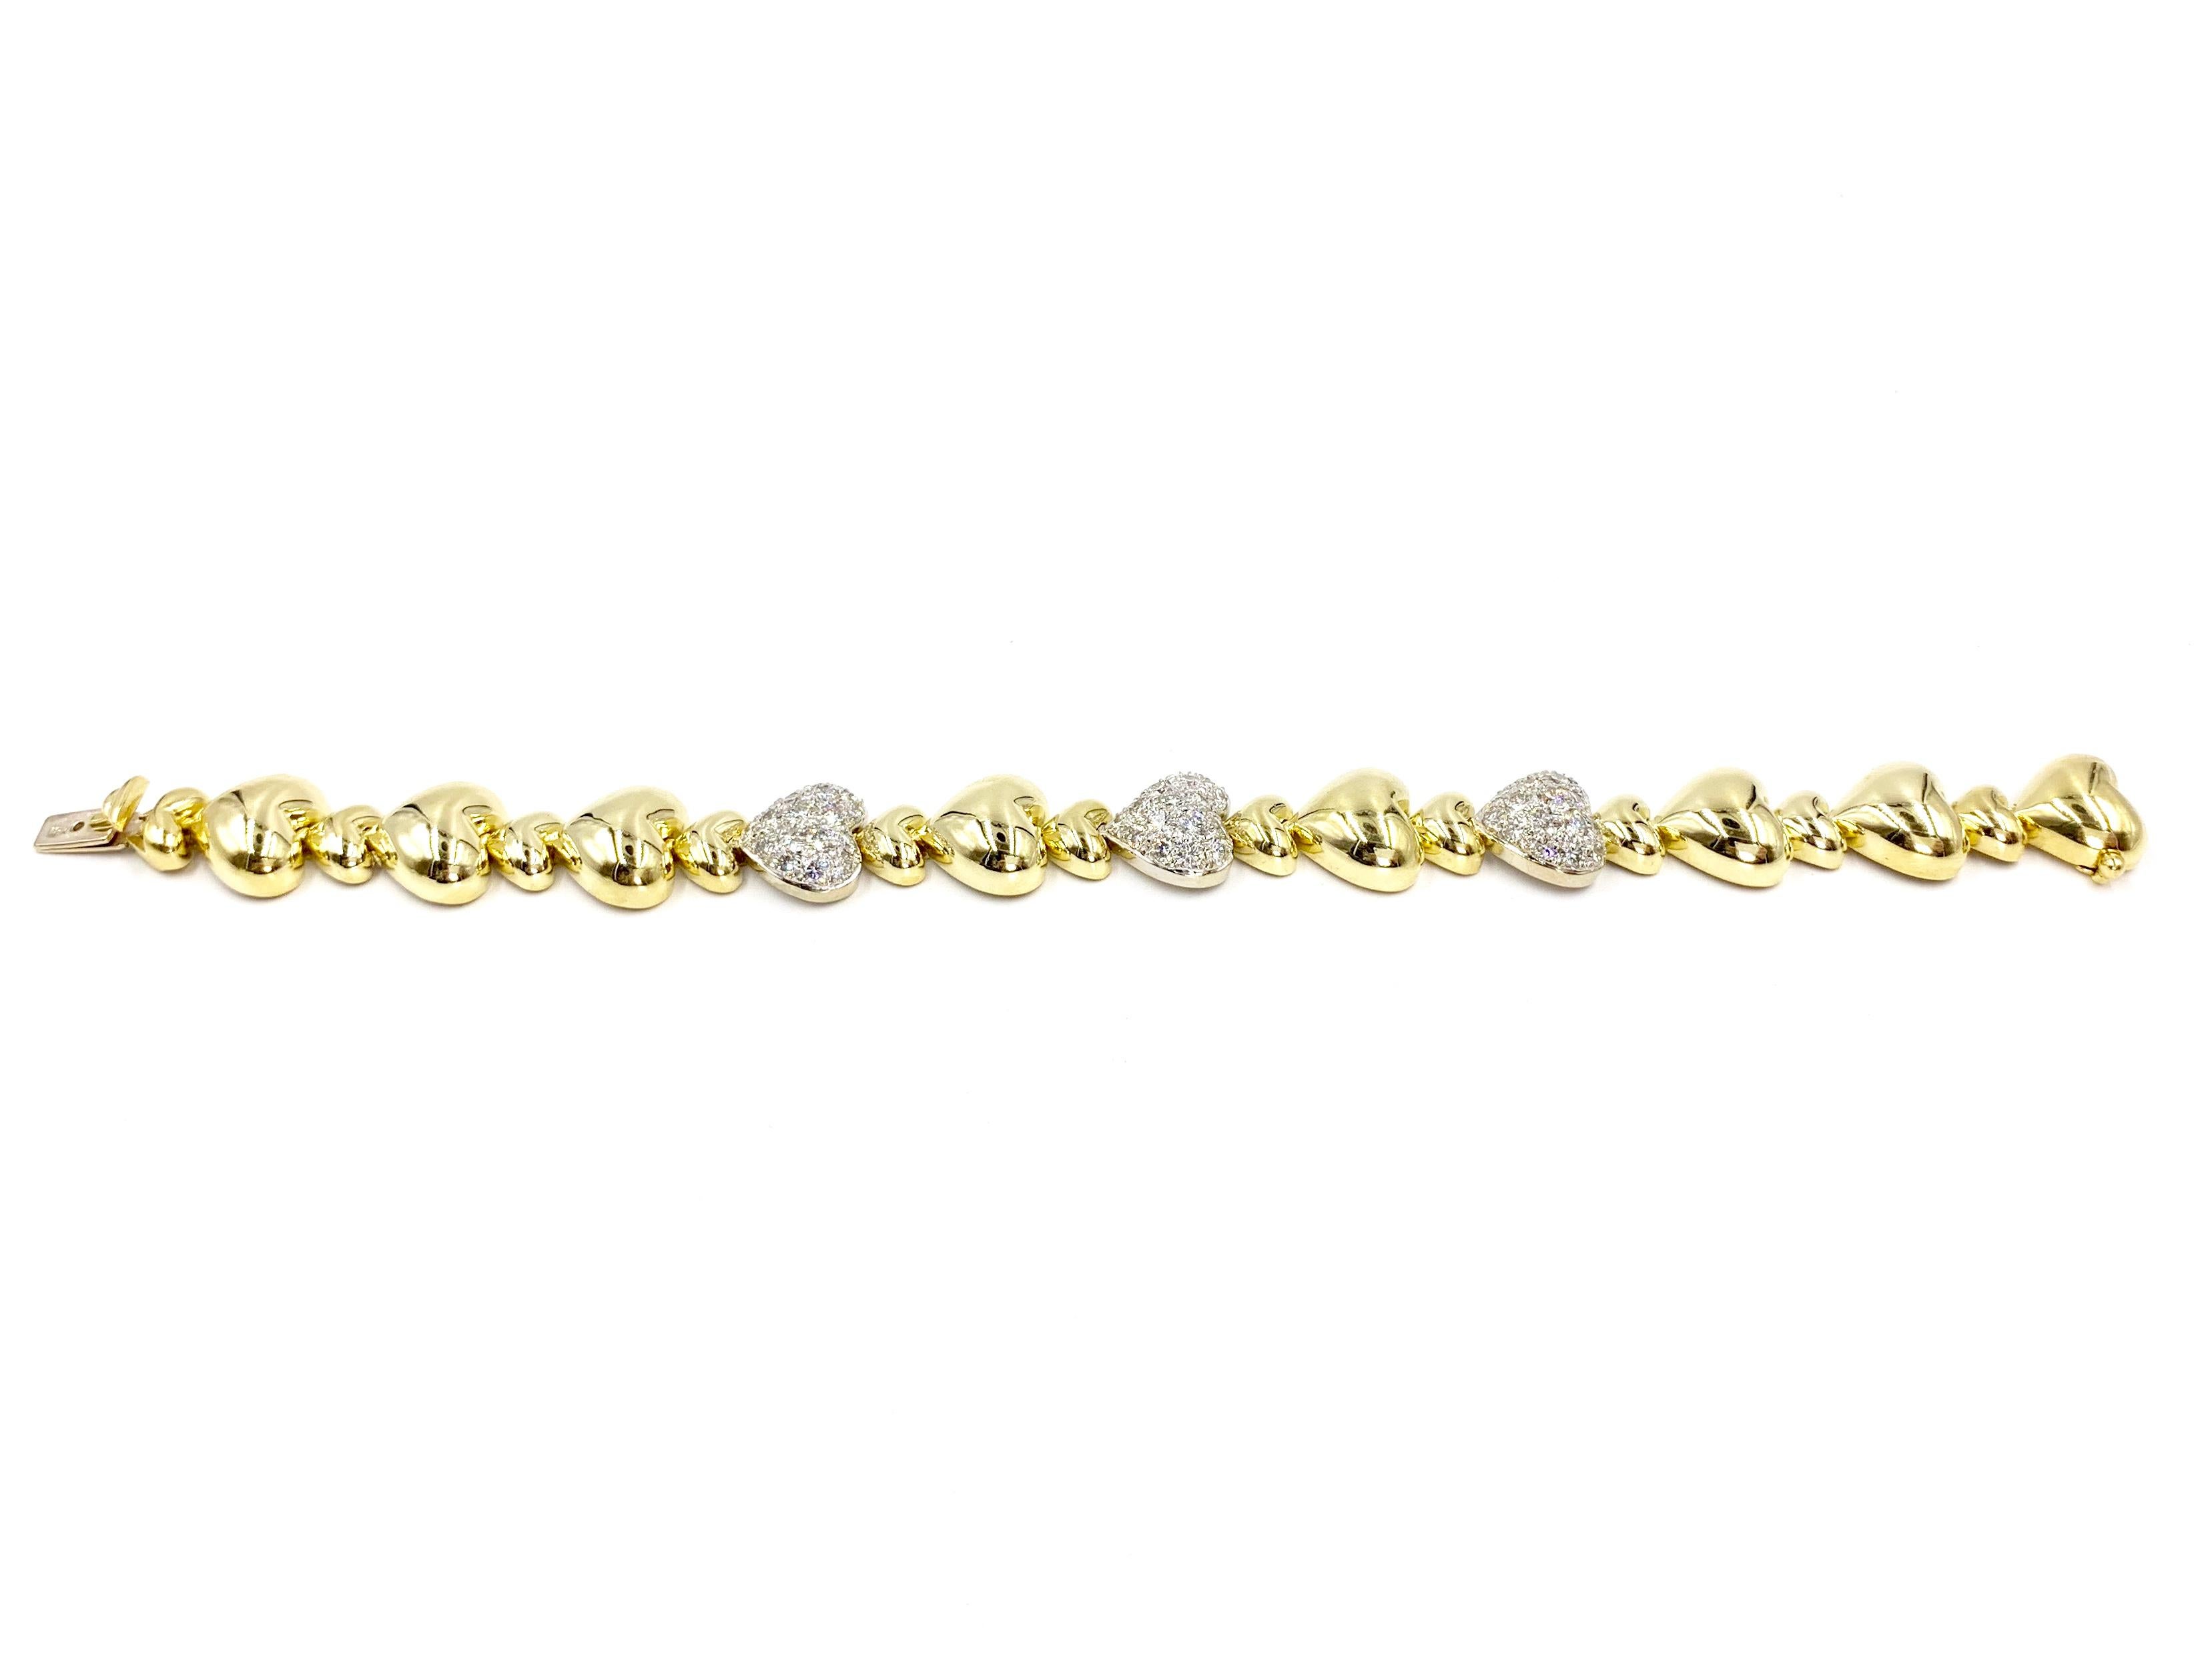 Crafted with superior quality by Sal Praschnik Inc. This high polished 18 karat yellow gold puffed-heart linked bracelet features three white gold hearts perfectly pave set with full cut round brilliant diamonds at 3.37 carats total weight. Diamond